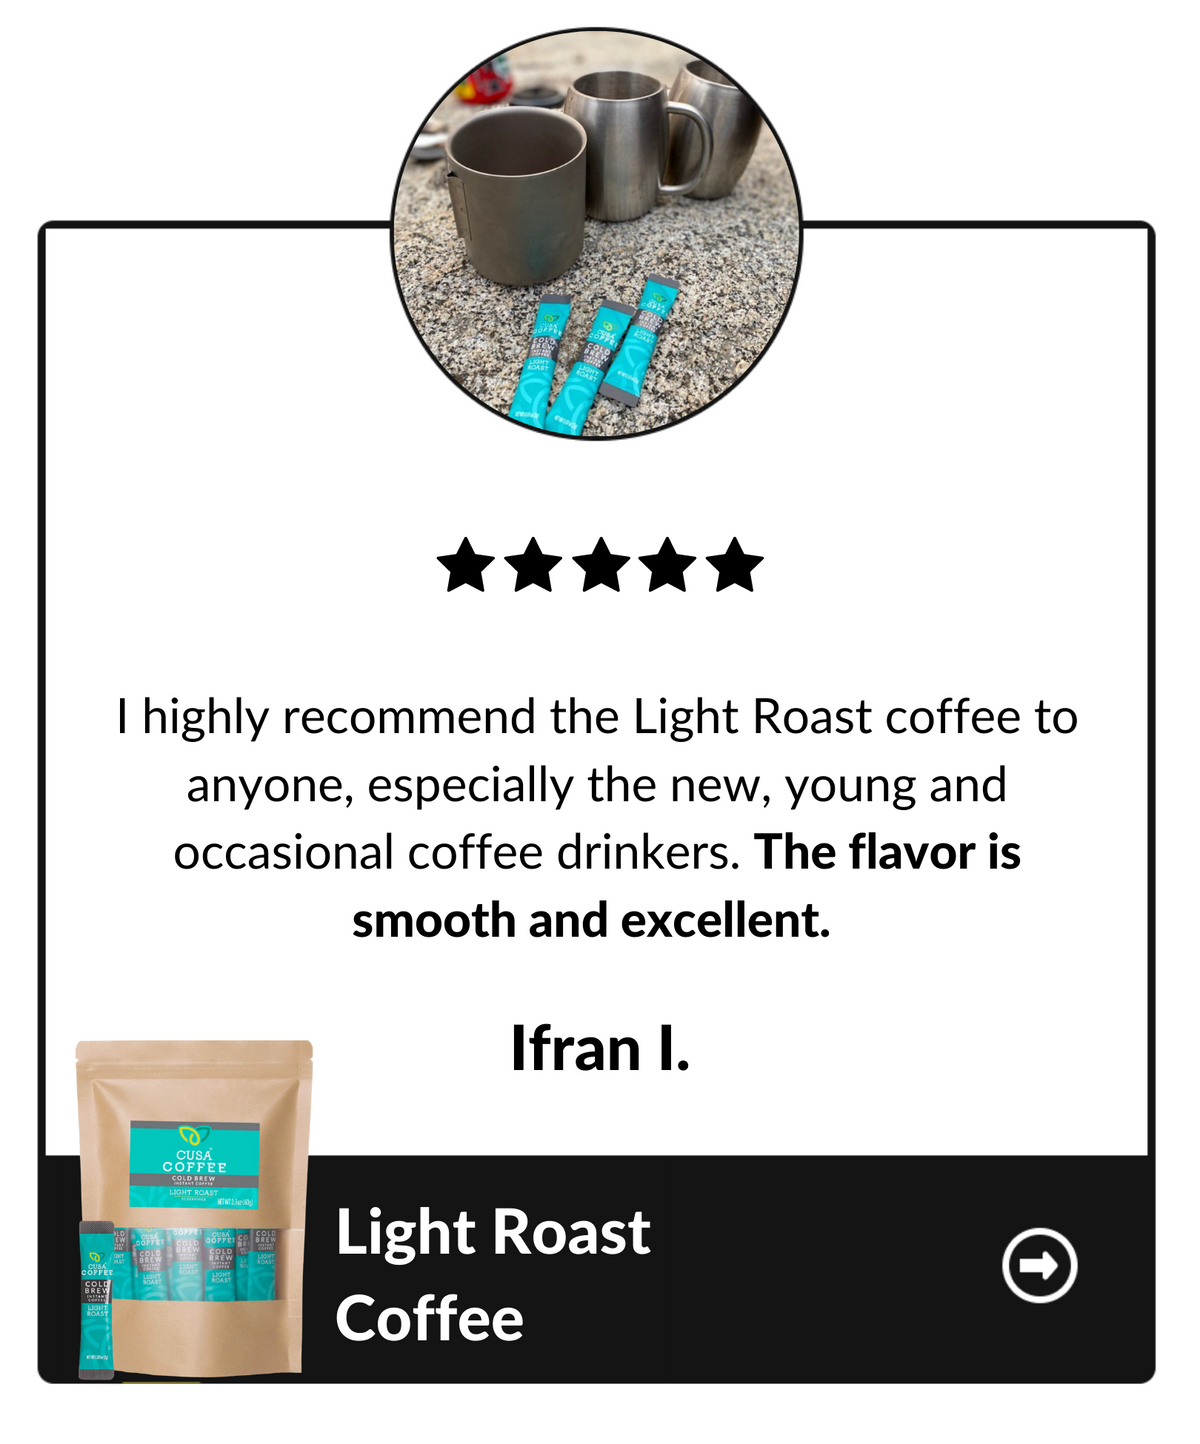 I highly recommend the Light Roast coffee to anyone, especially the new, young and occasional coffee drinkers. The flavor is smooth and excellent. Ifran I, Light Roast Coffee testimonial